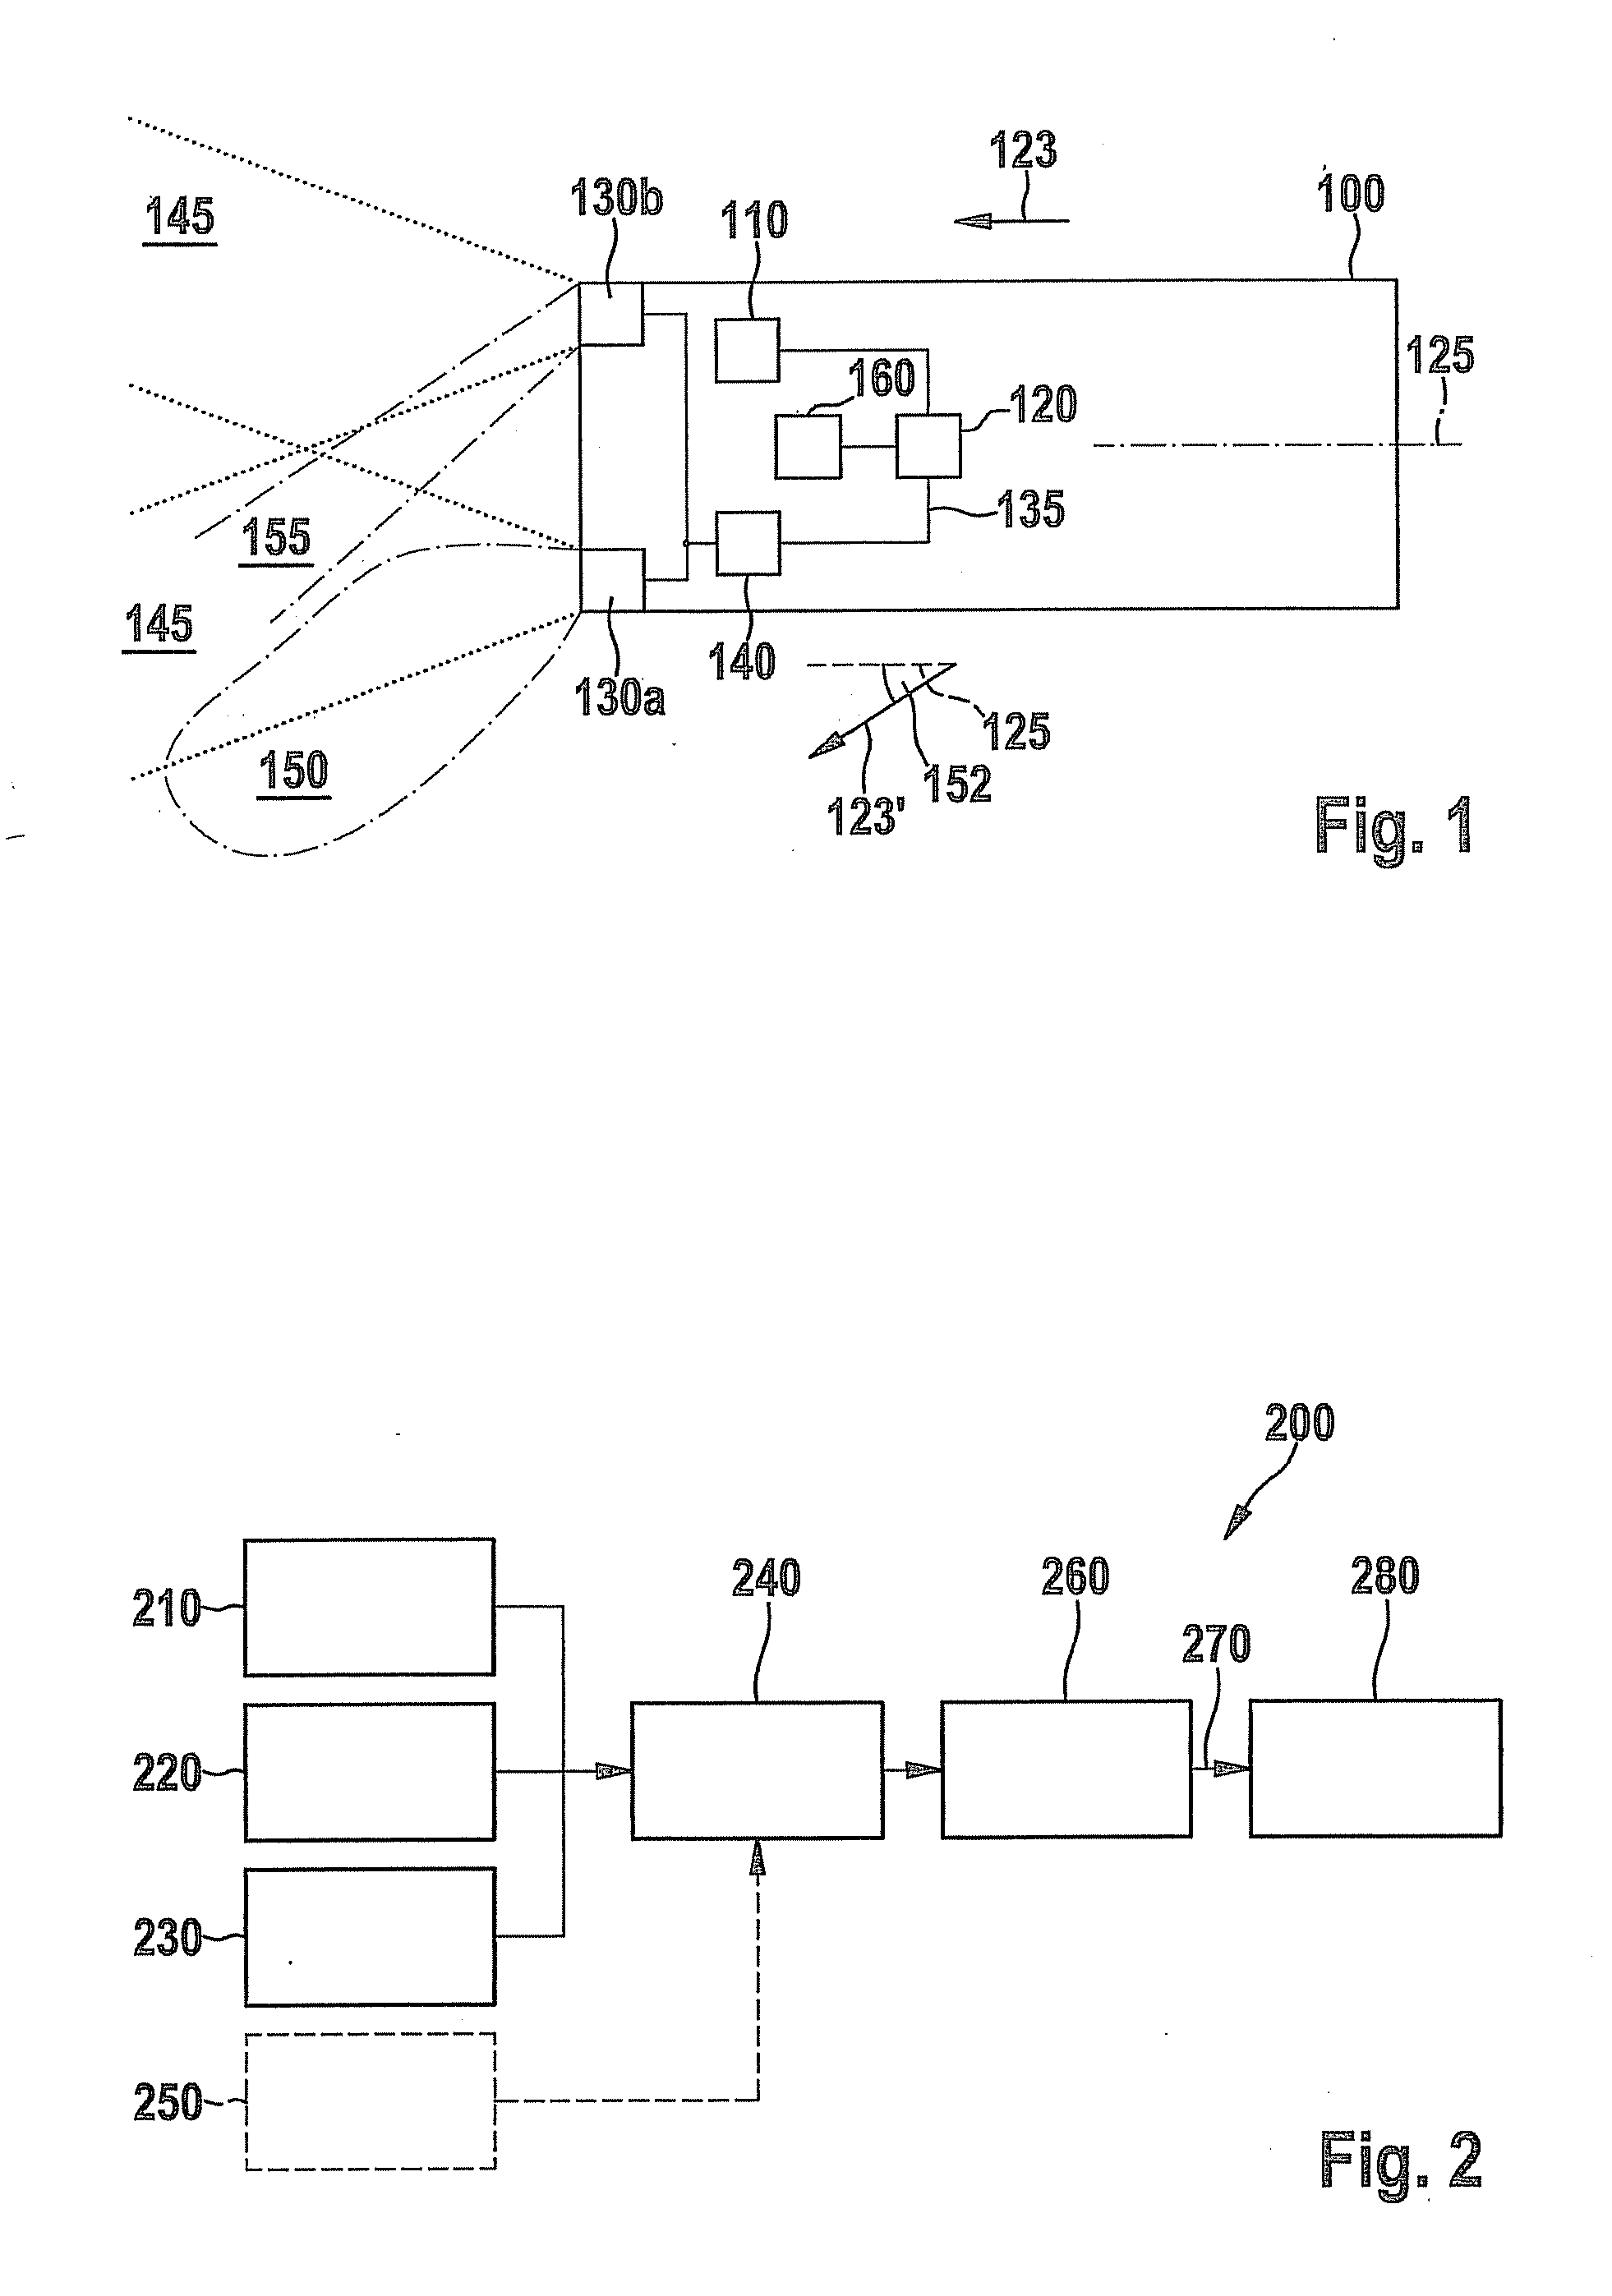 Method and device for adjusting a light emission of at least one headlight of a vehicle